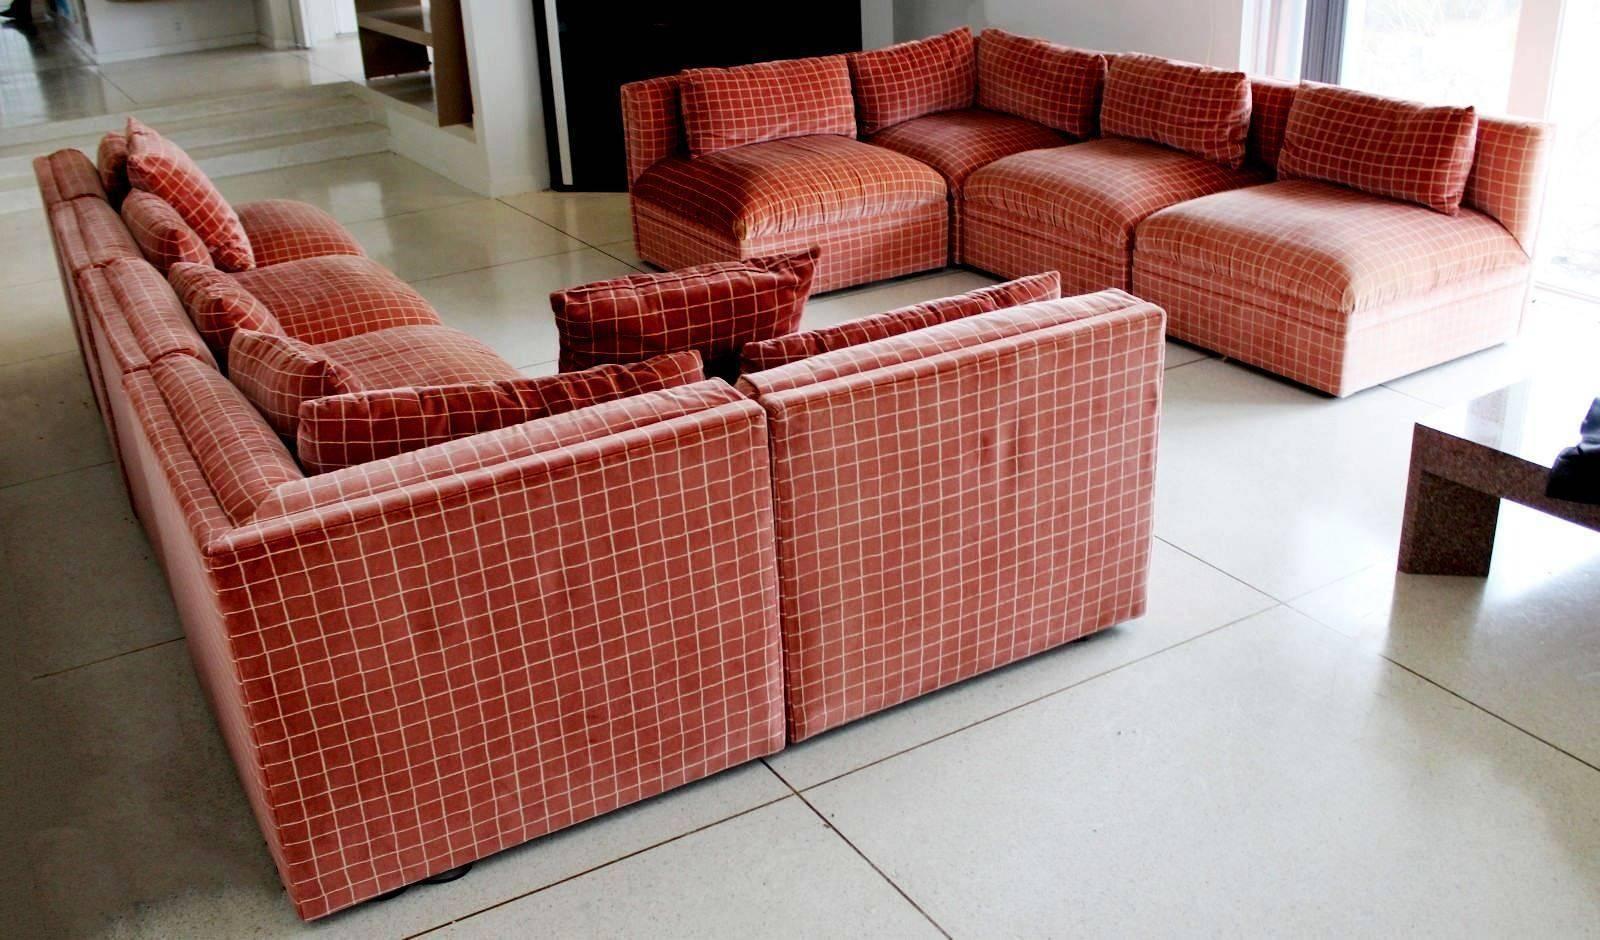 For your consideration is a fabulous, massive, nine-piece sectional sofa, in checkered red velvet, by Milo Baughman for Directional, circa the 1970s. In overall excellent vintage condition, one small section shows some slight staining, is included